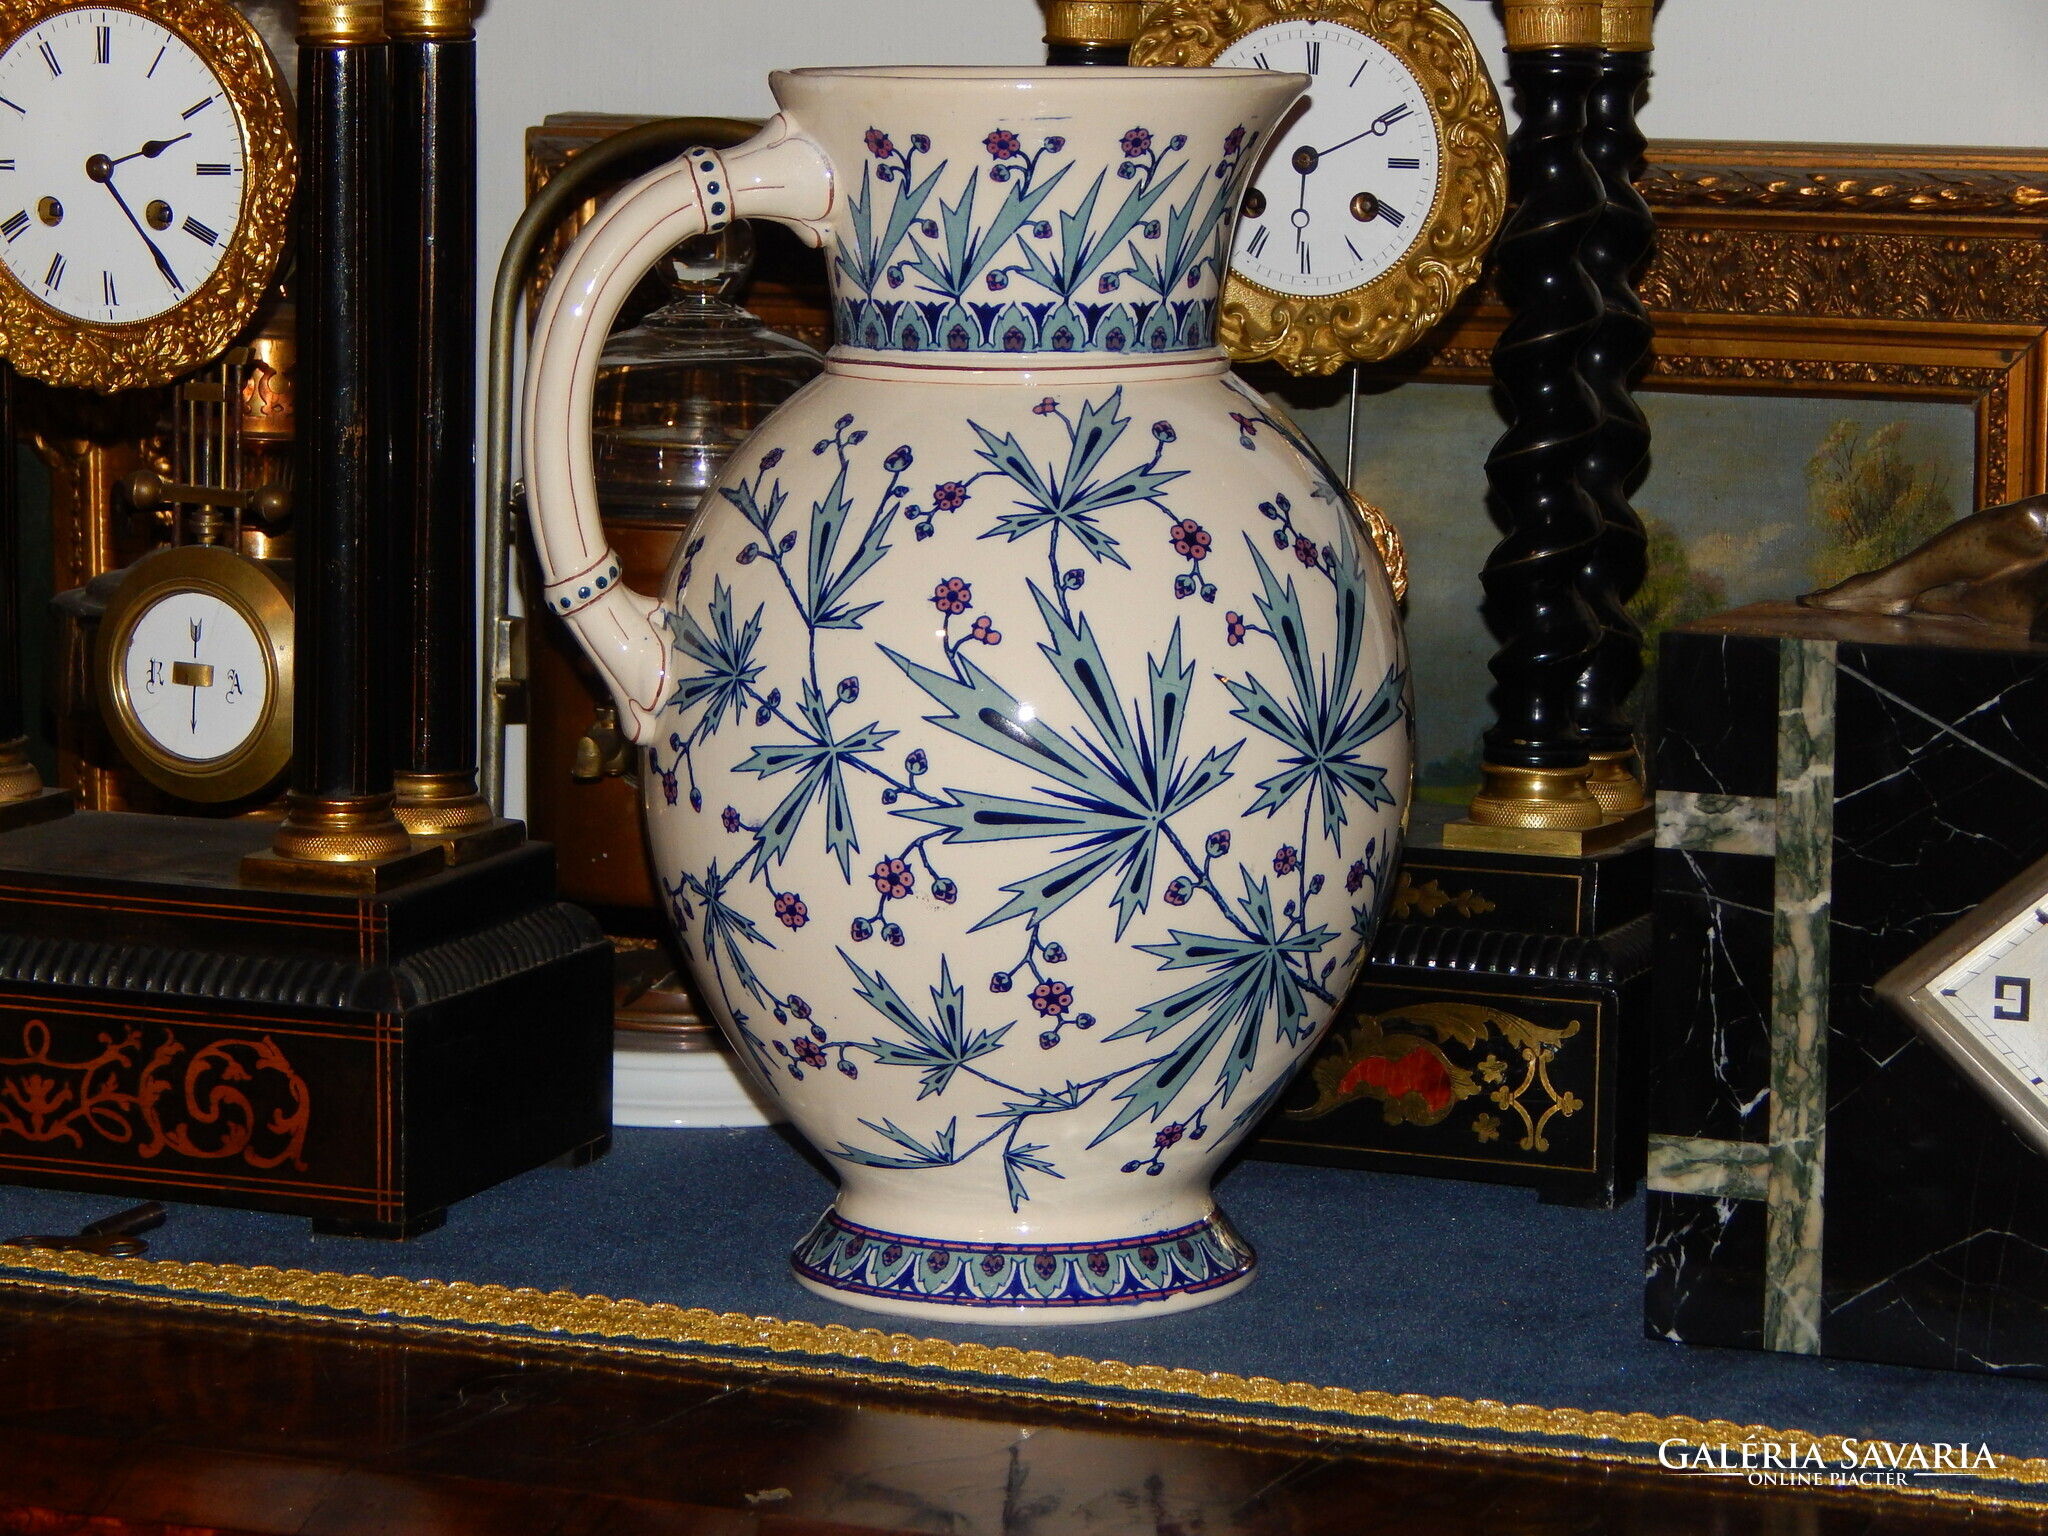 Pottery, Ceramics - Pot, jug - German pottery  Galeria Savaria online  marketplace - Buy or sell on a reliable, quality online platform!